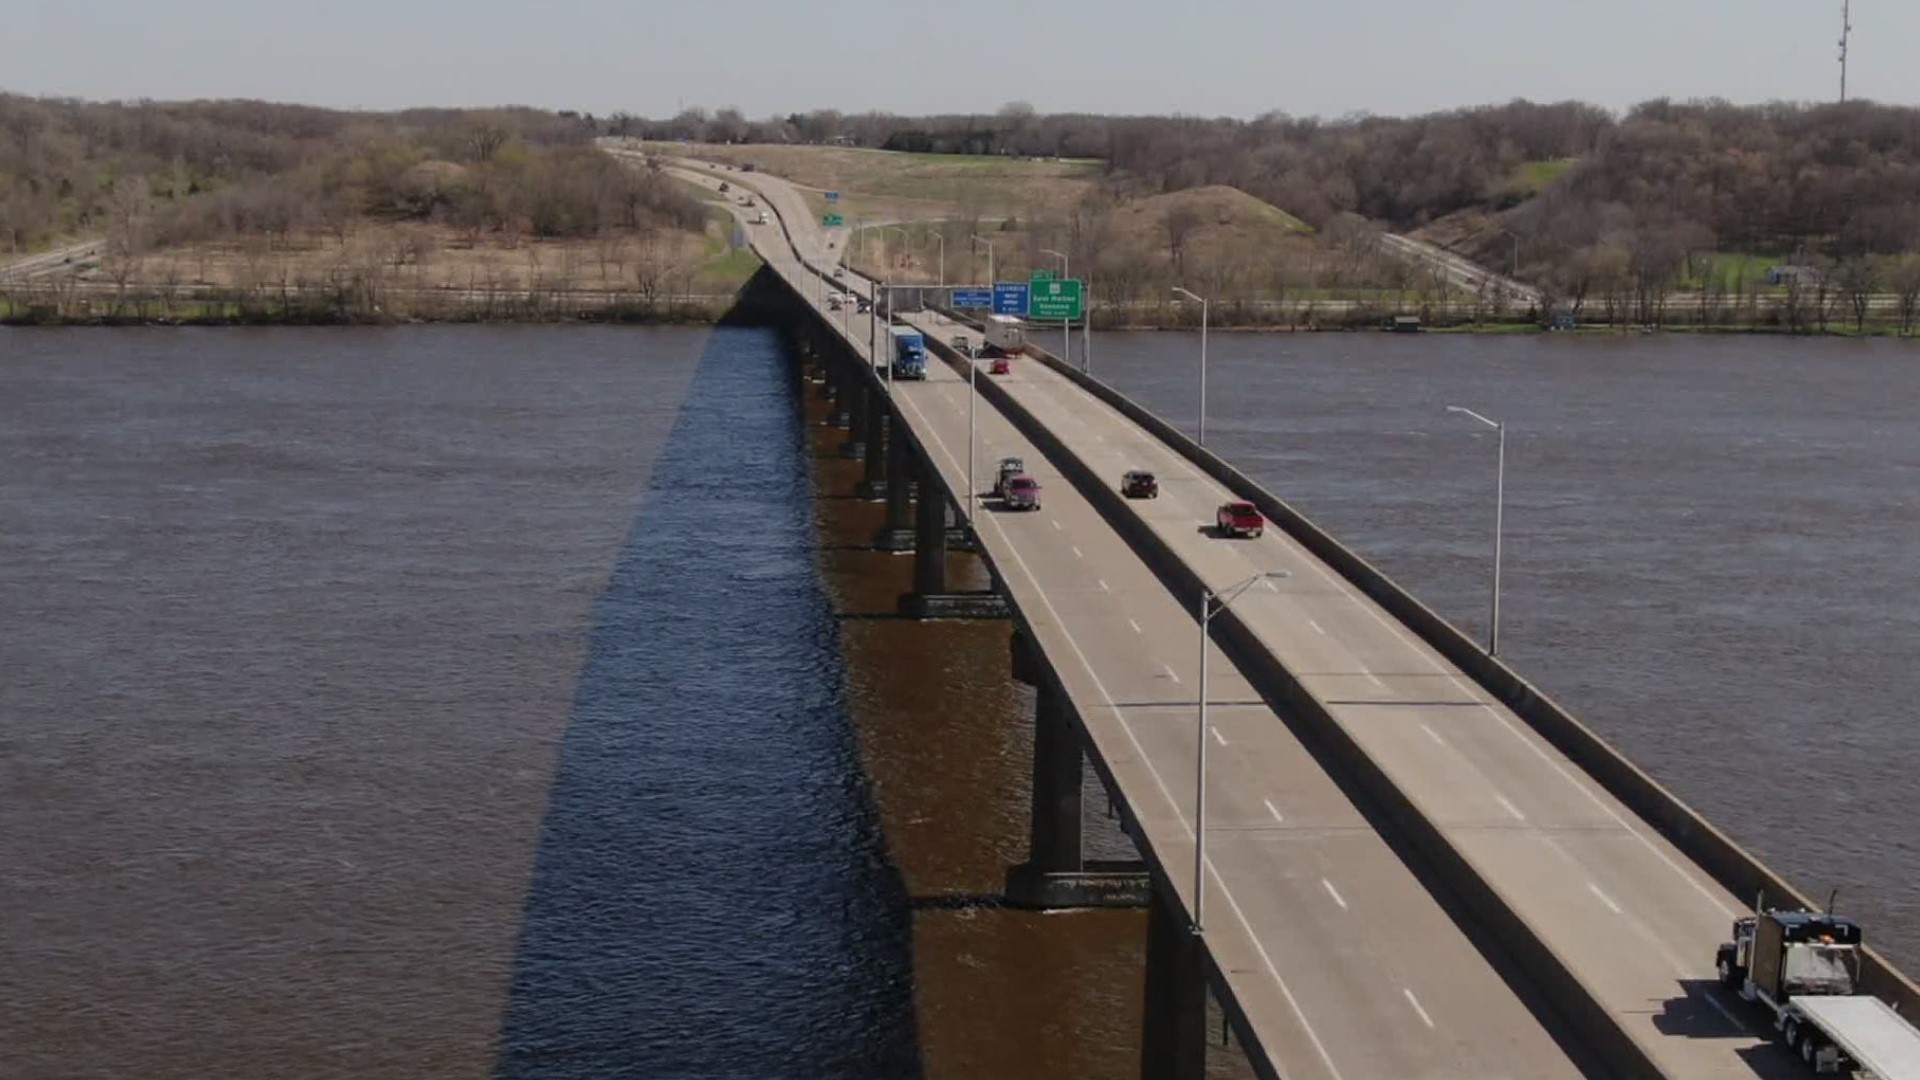 Of the four options that remain, two would require the current bridge to be demolished.